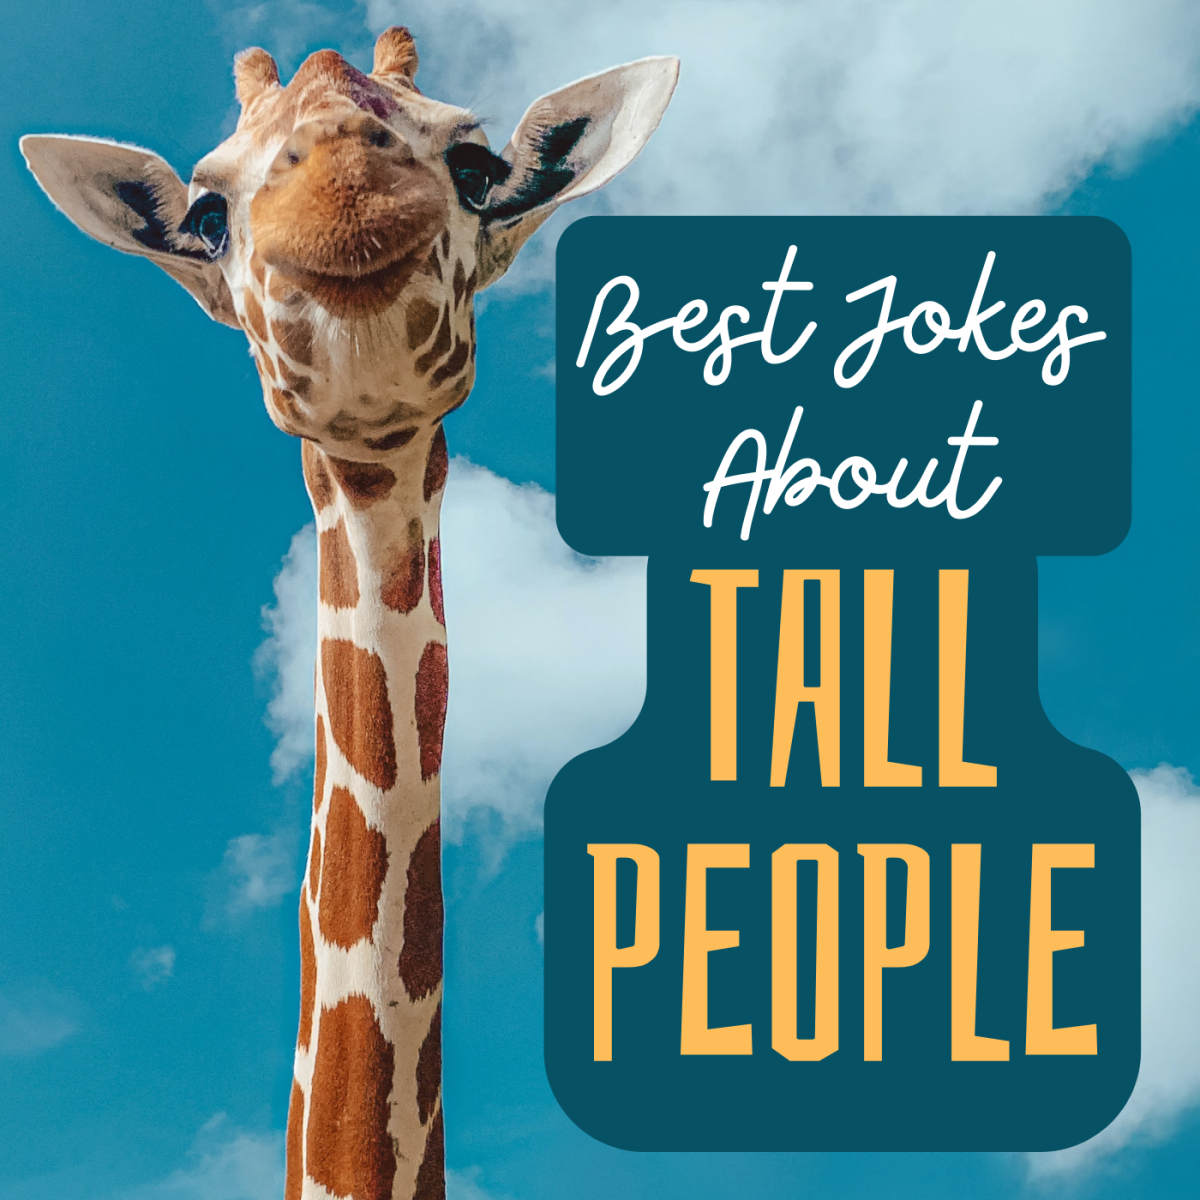 "How's the weather up there?" We've all heard that one before—discover a bunch of unique, funny jokes about our tall friends!